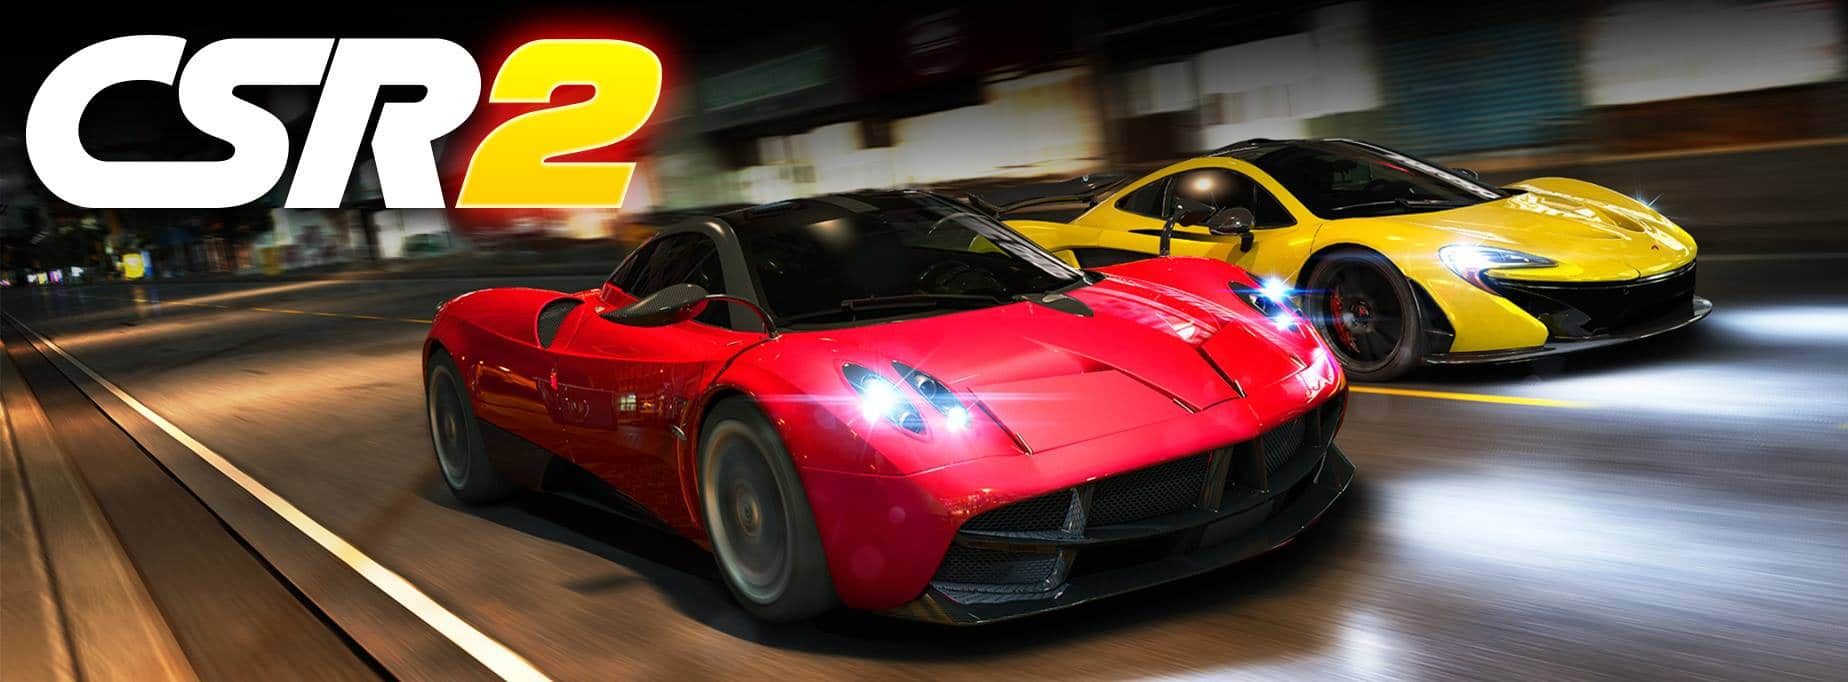 Csr Racing Apk Free Download For Android